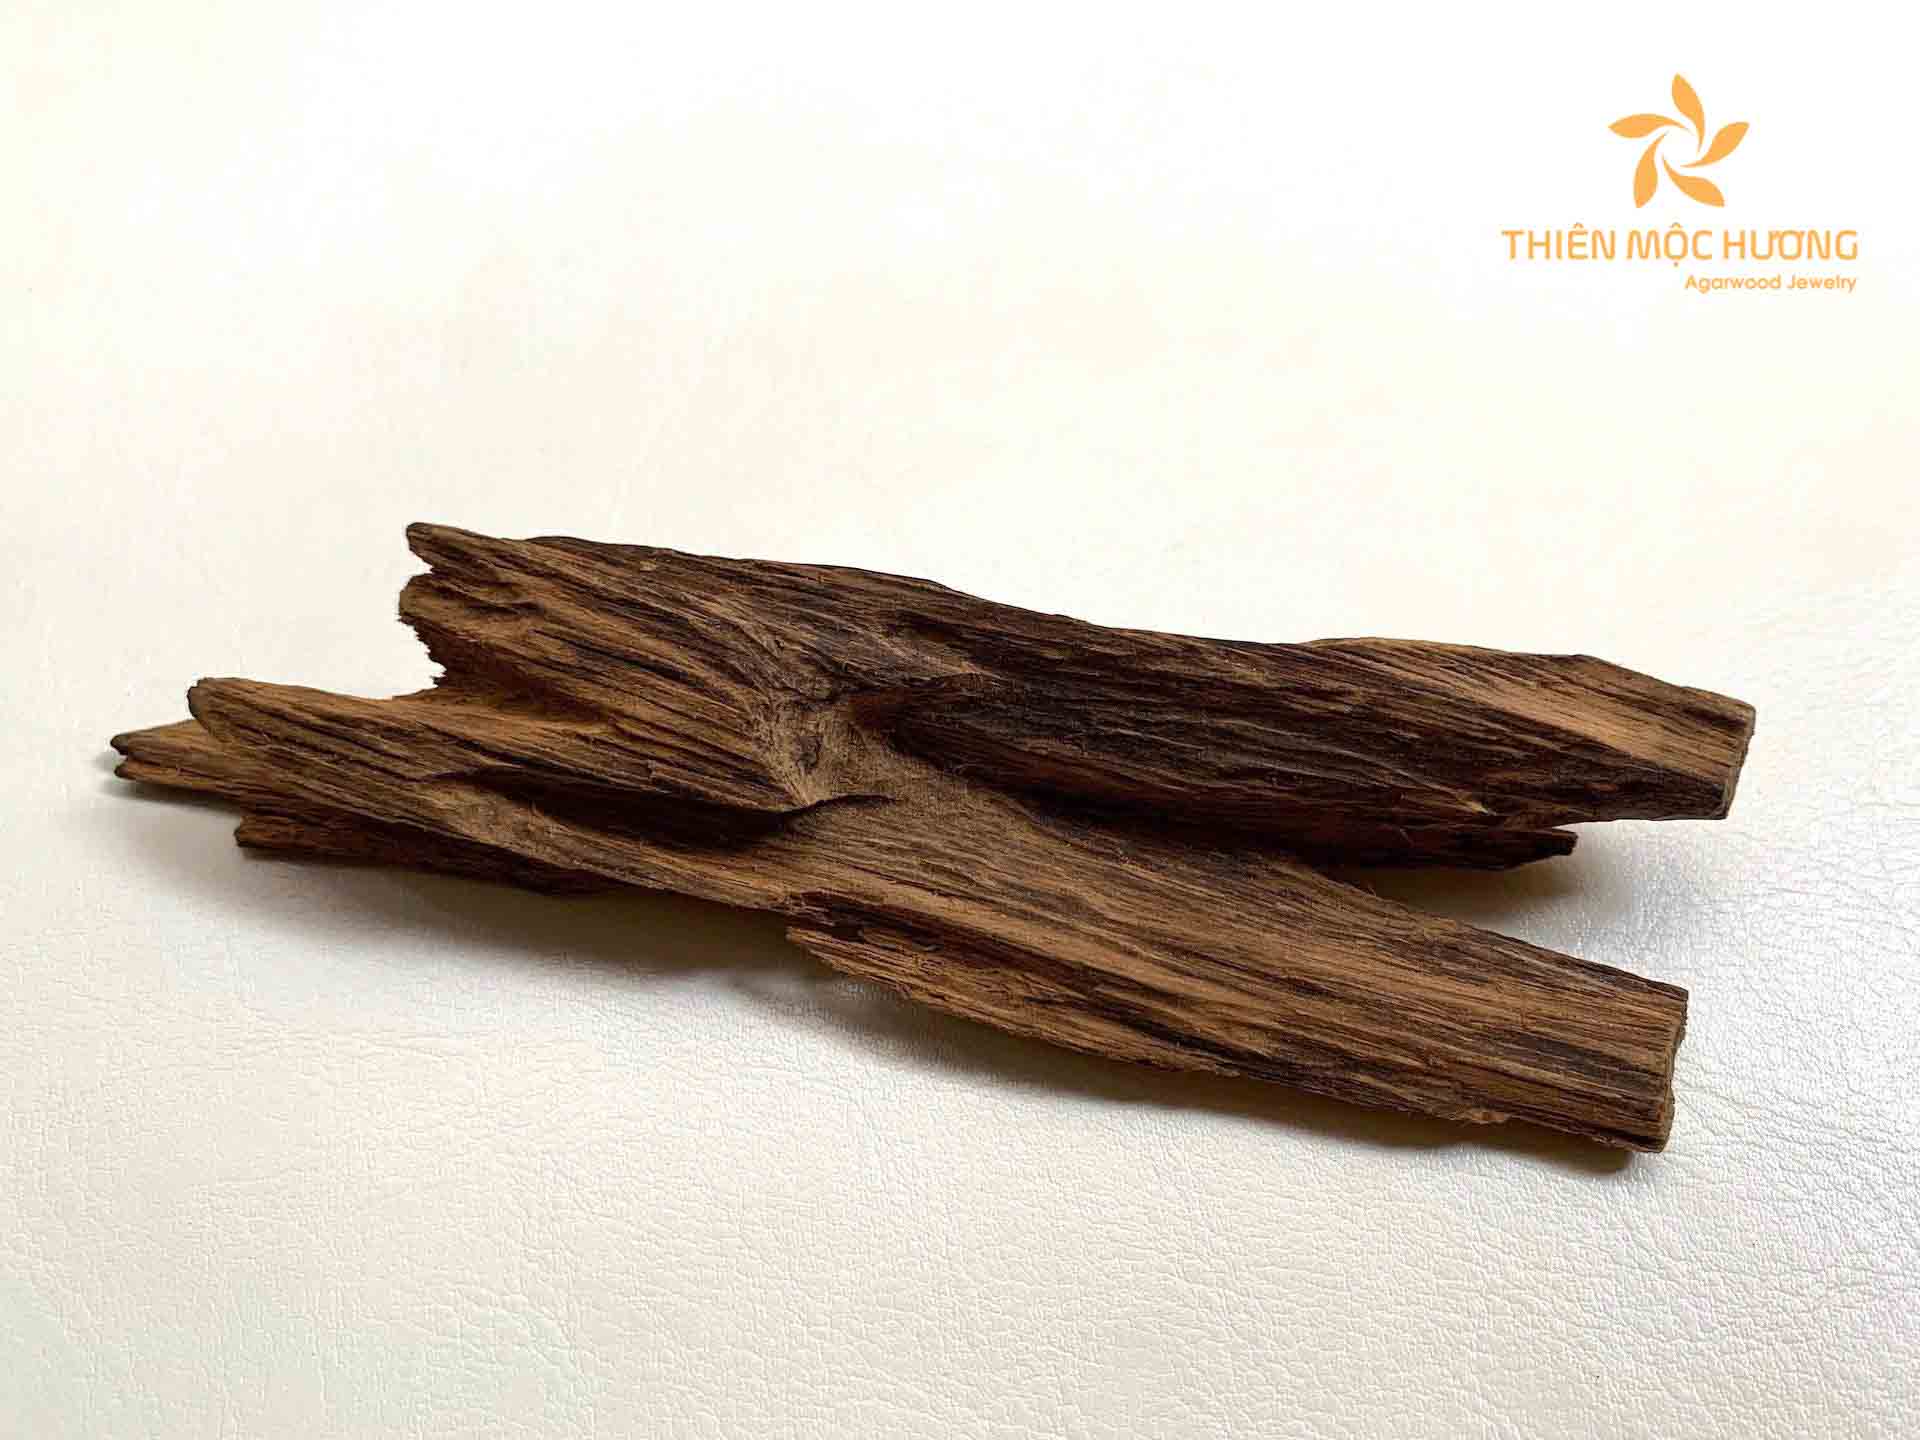 The crucial factor to consider when choosing the best agarwood bracelet for men is the quality 